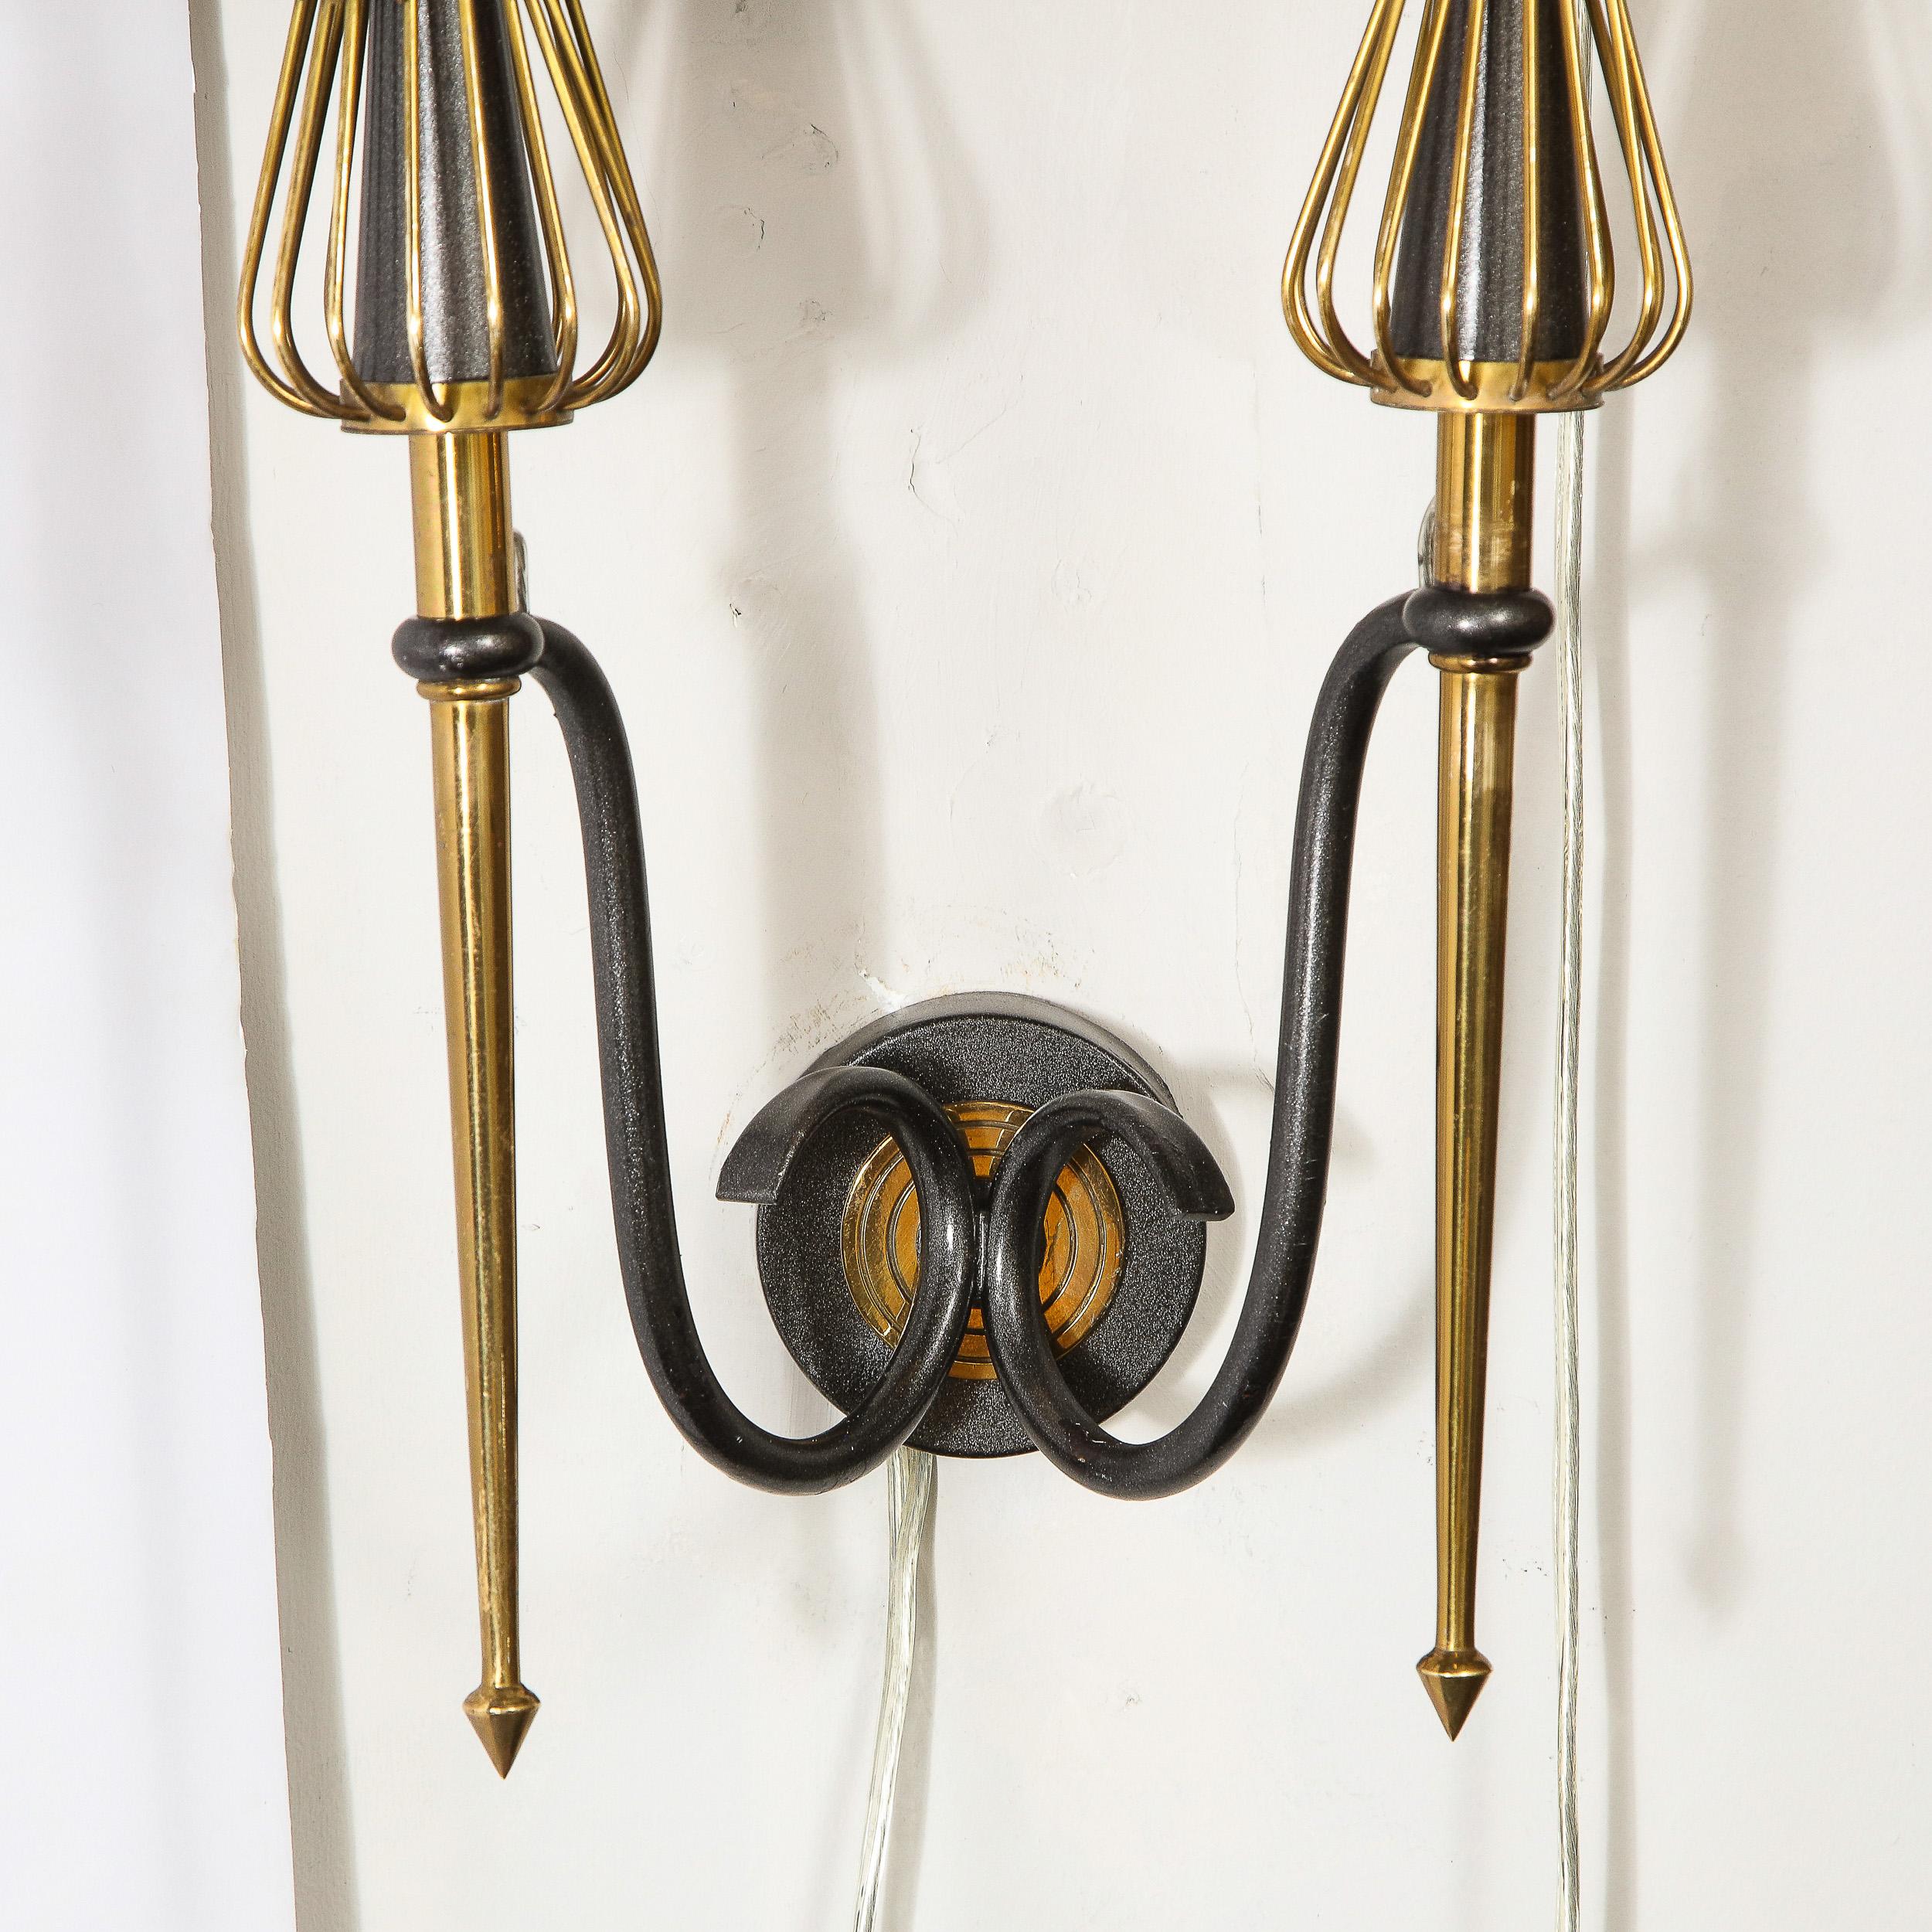 Pair of Mid-Century Modern Brass & Black Enamel Sconces w/ Curvilinear Detailing In Excellent Condition For Sale In New York, NY